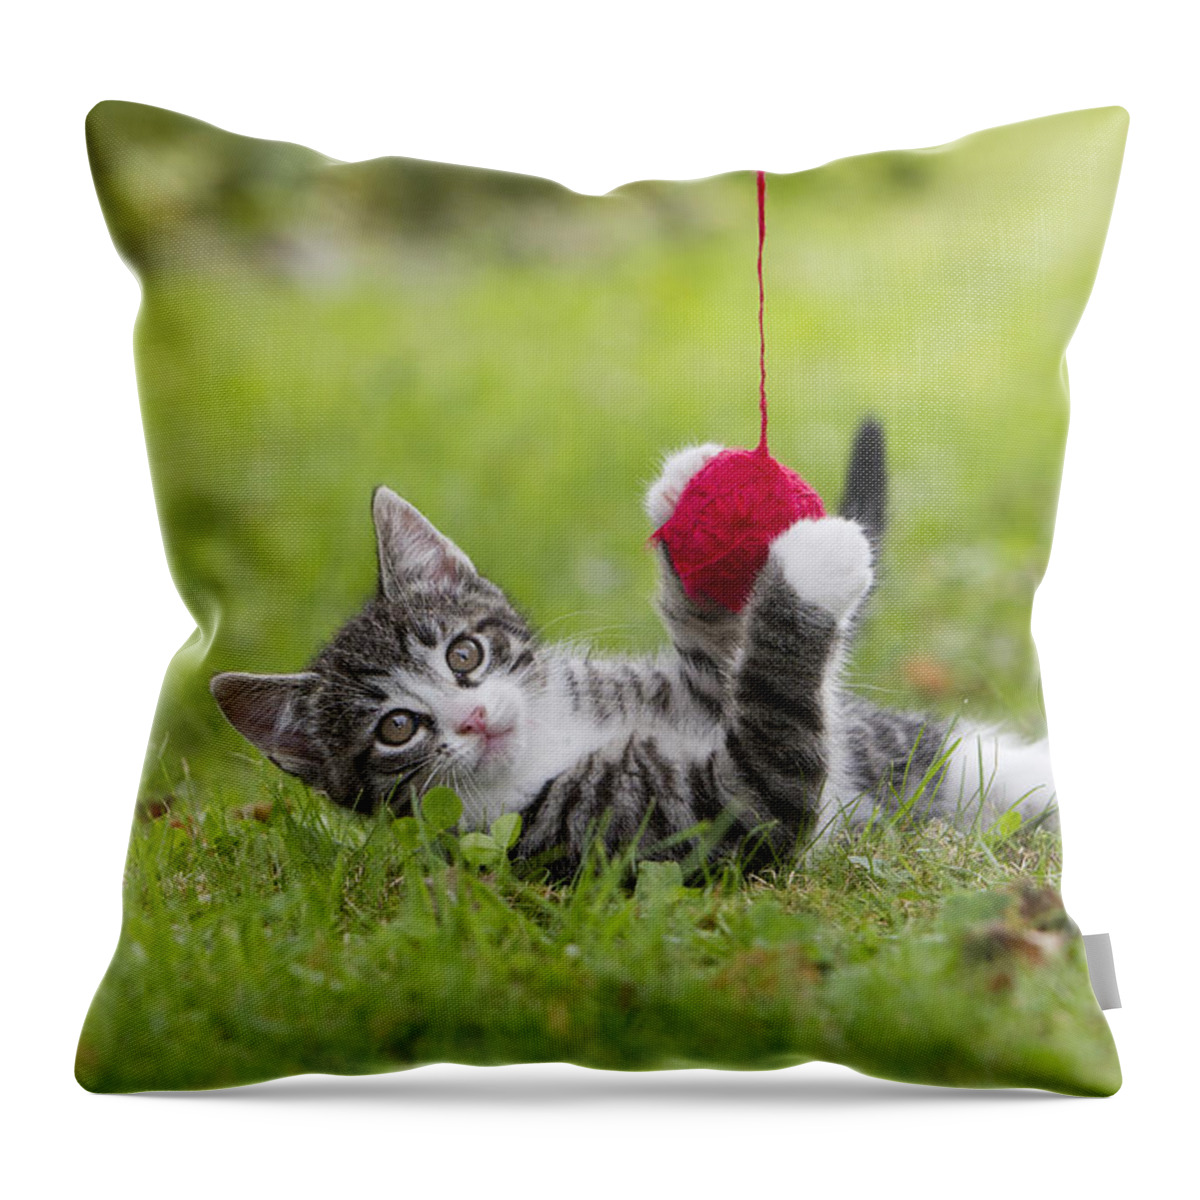 Feb0514 Throw Pillow featuring the photograph Tabby Kitten Playing With Ball Of Wool by Duncan Usher